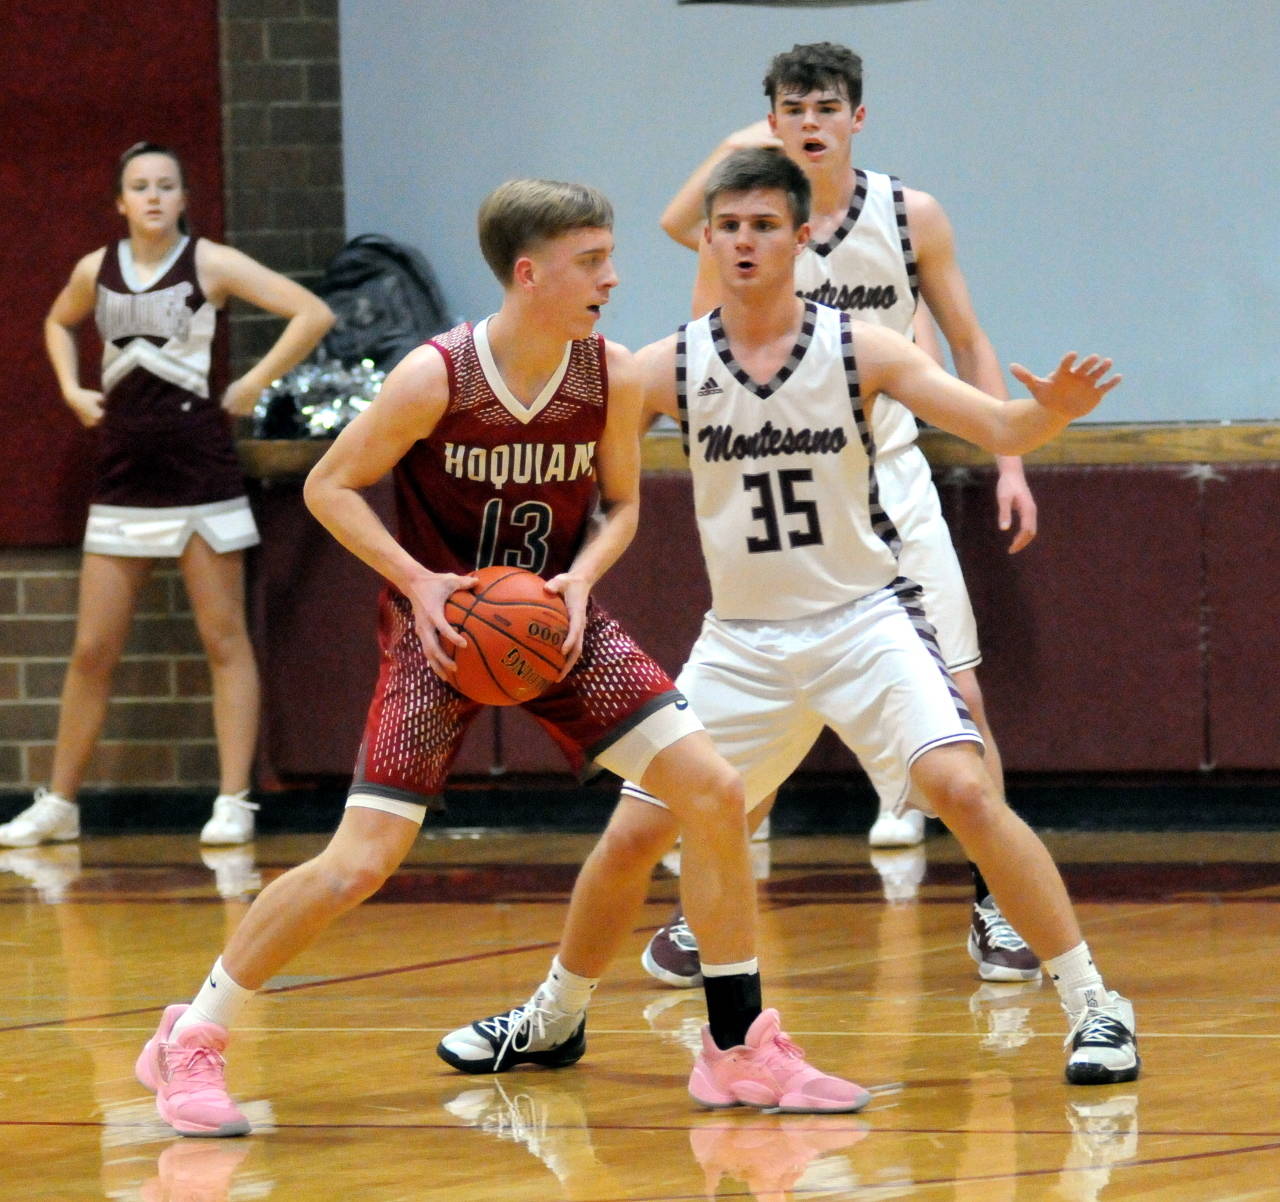 Hoquiam’s Zach Elsos looks for room to pass while being defended by Montesano’s Ben Wills during the Bulldogs’ 72-38 victory on Tuesday at Montesano High School. (Ryan Sparks | Grays Harbor News Group)